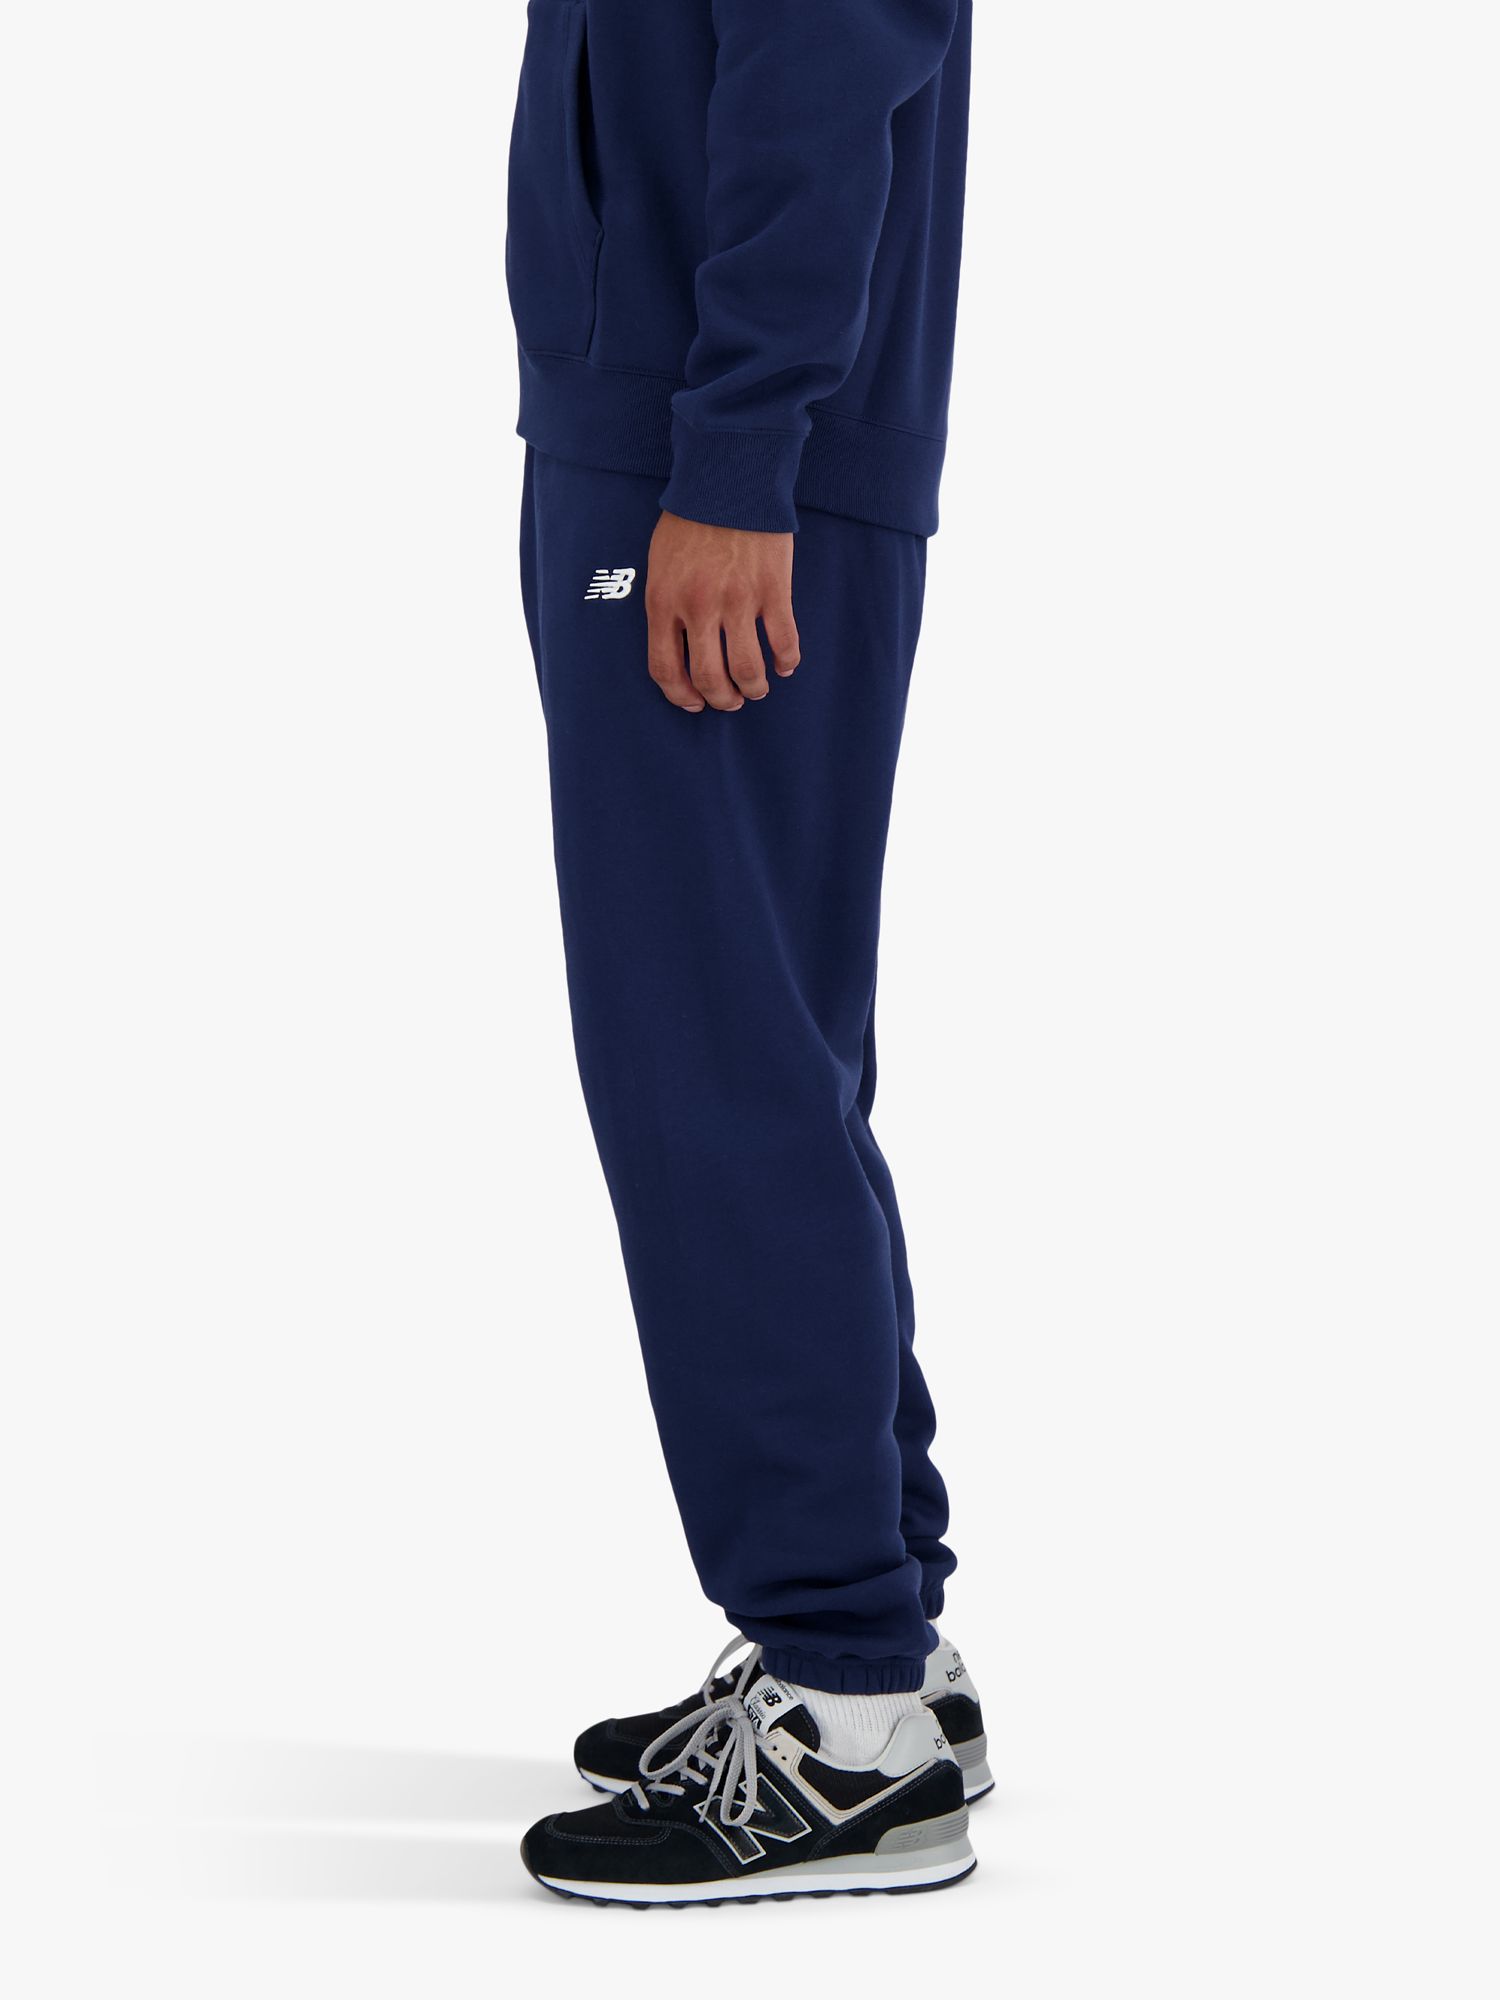 Buy New Balance Small Logo Joggers, Navy Online at johnlewis.com